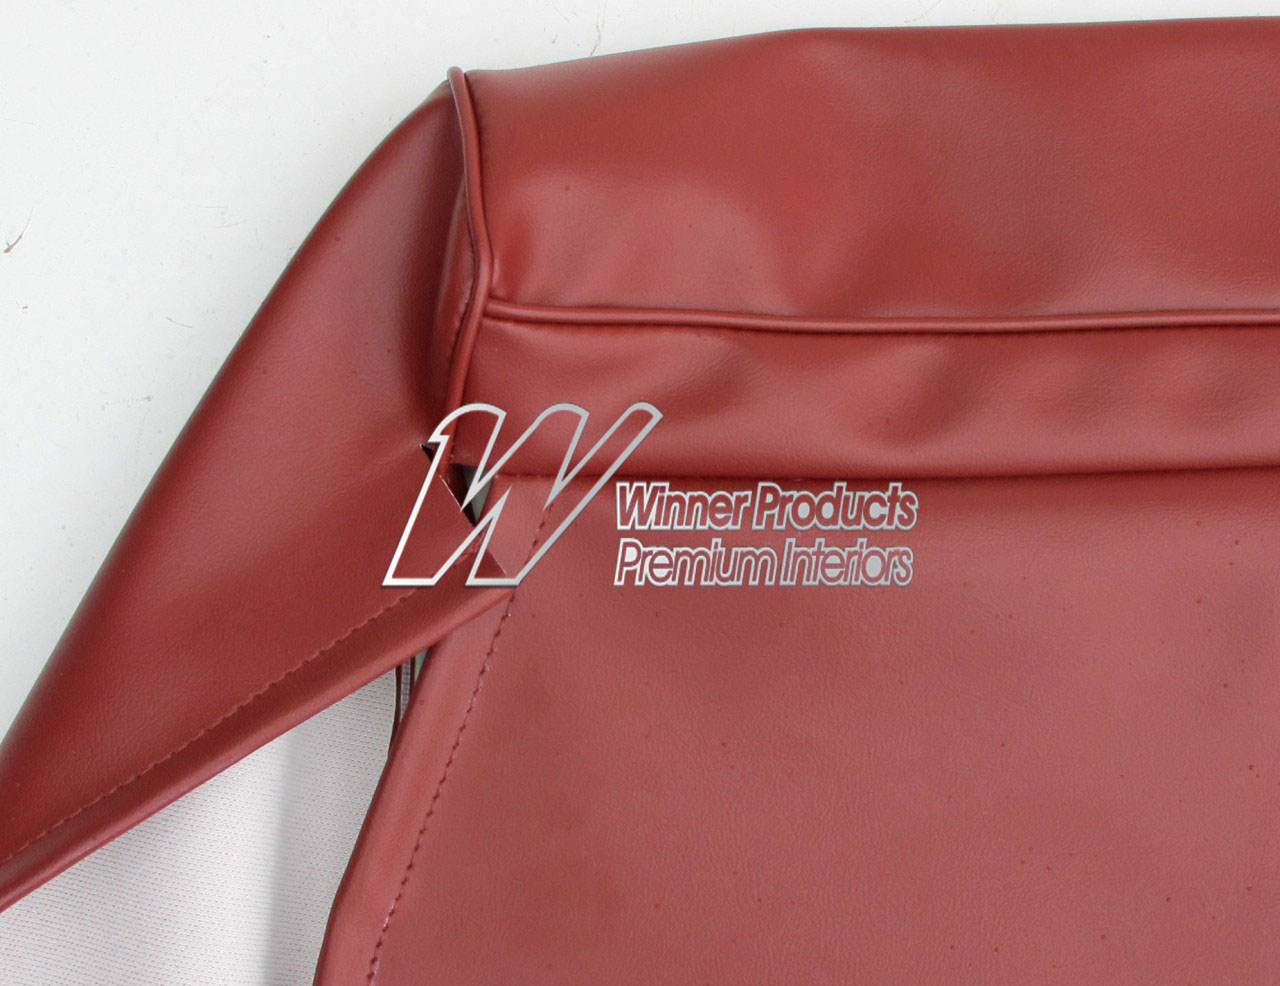 Holden Standard EH Standard Ute C55 Bolero Red Seat Covers (Image 7 of 8)